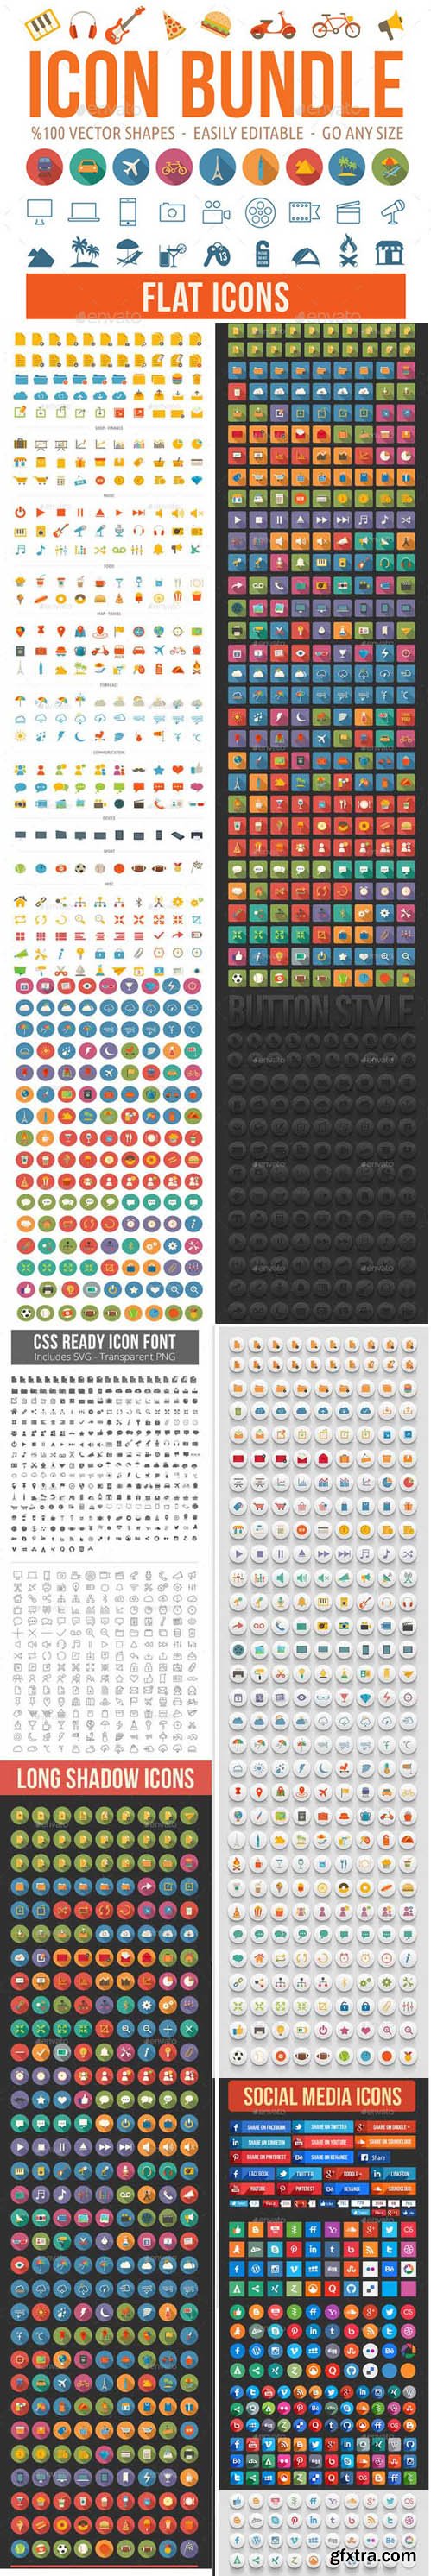 Graphicriver - 2000 Vector Icons Collection [Re-Up]